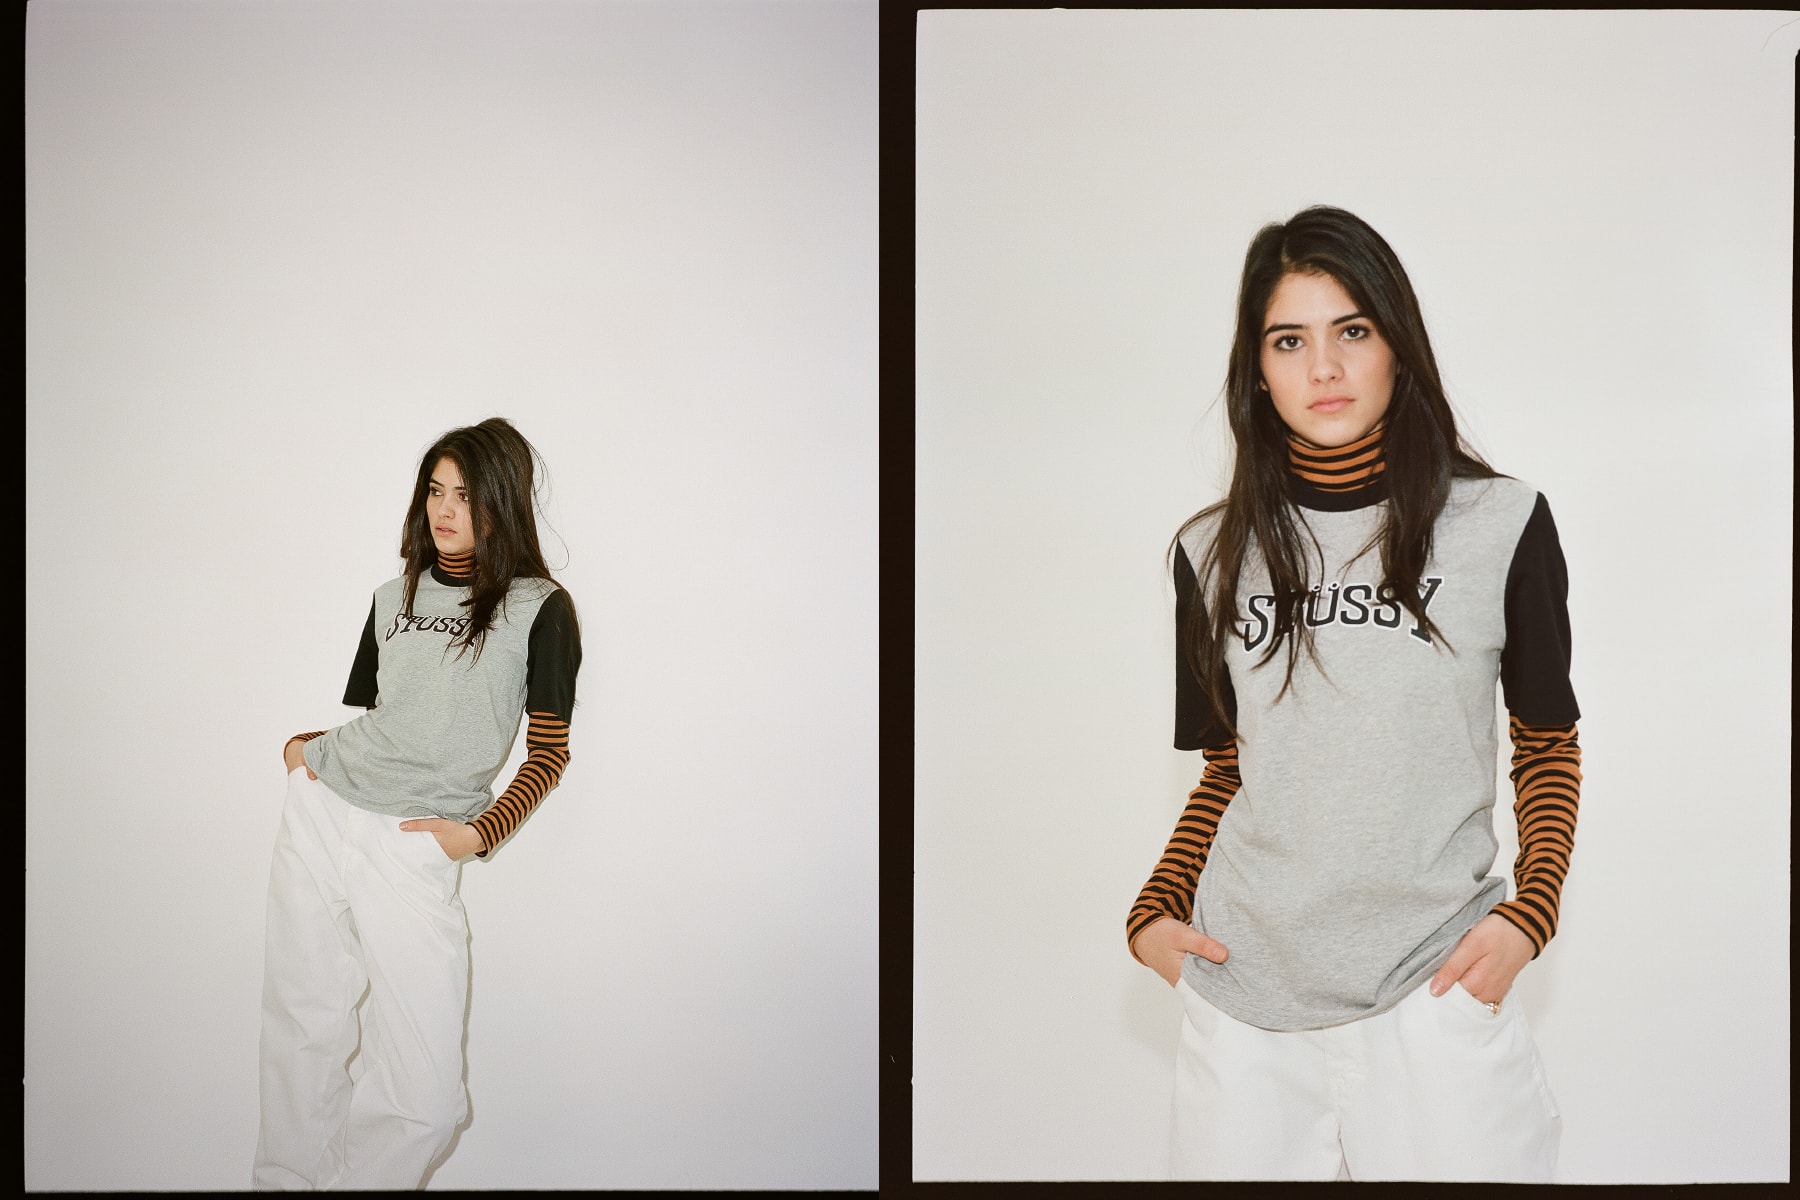 Stüssy Extra Fly Gear Collection Release